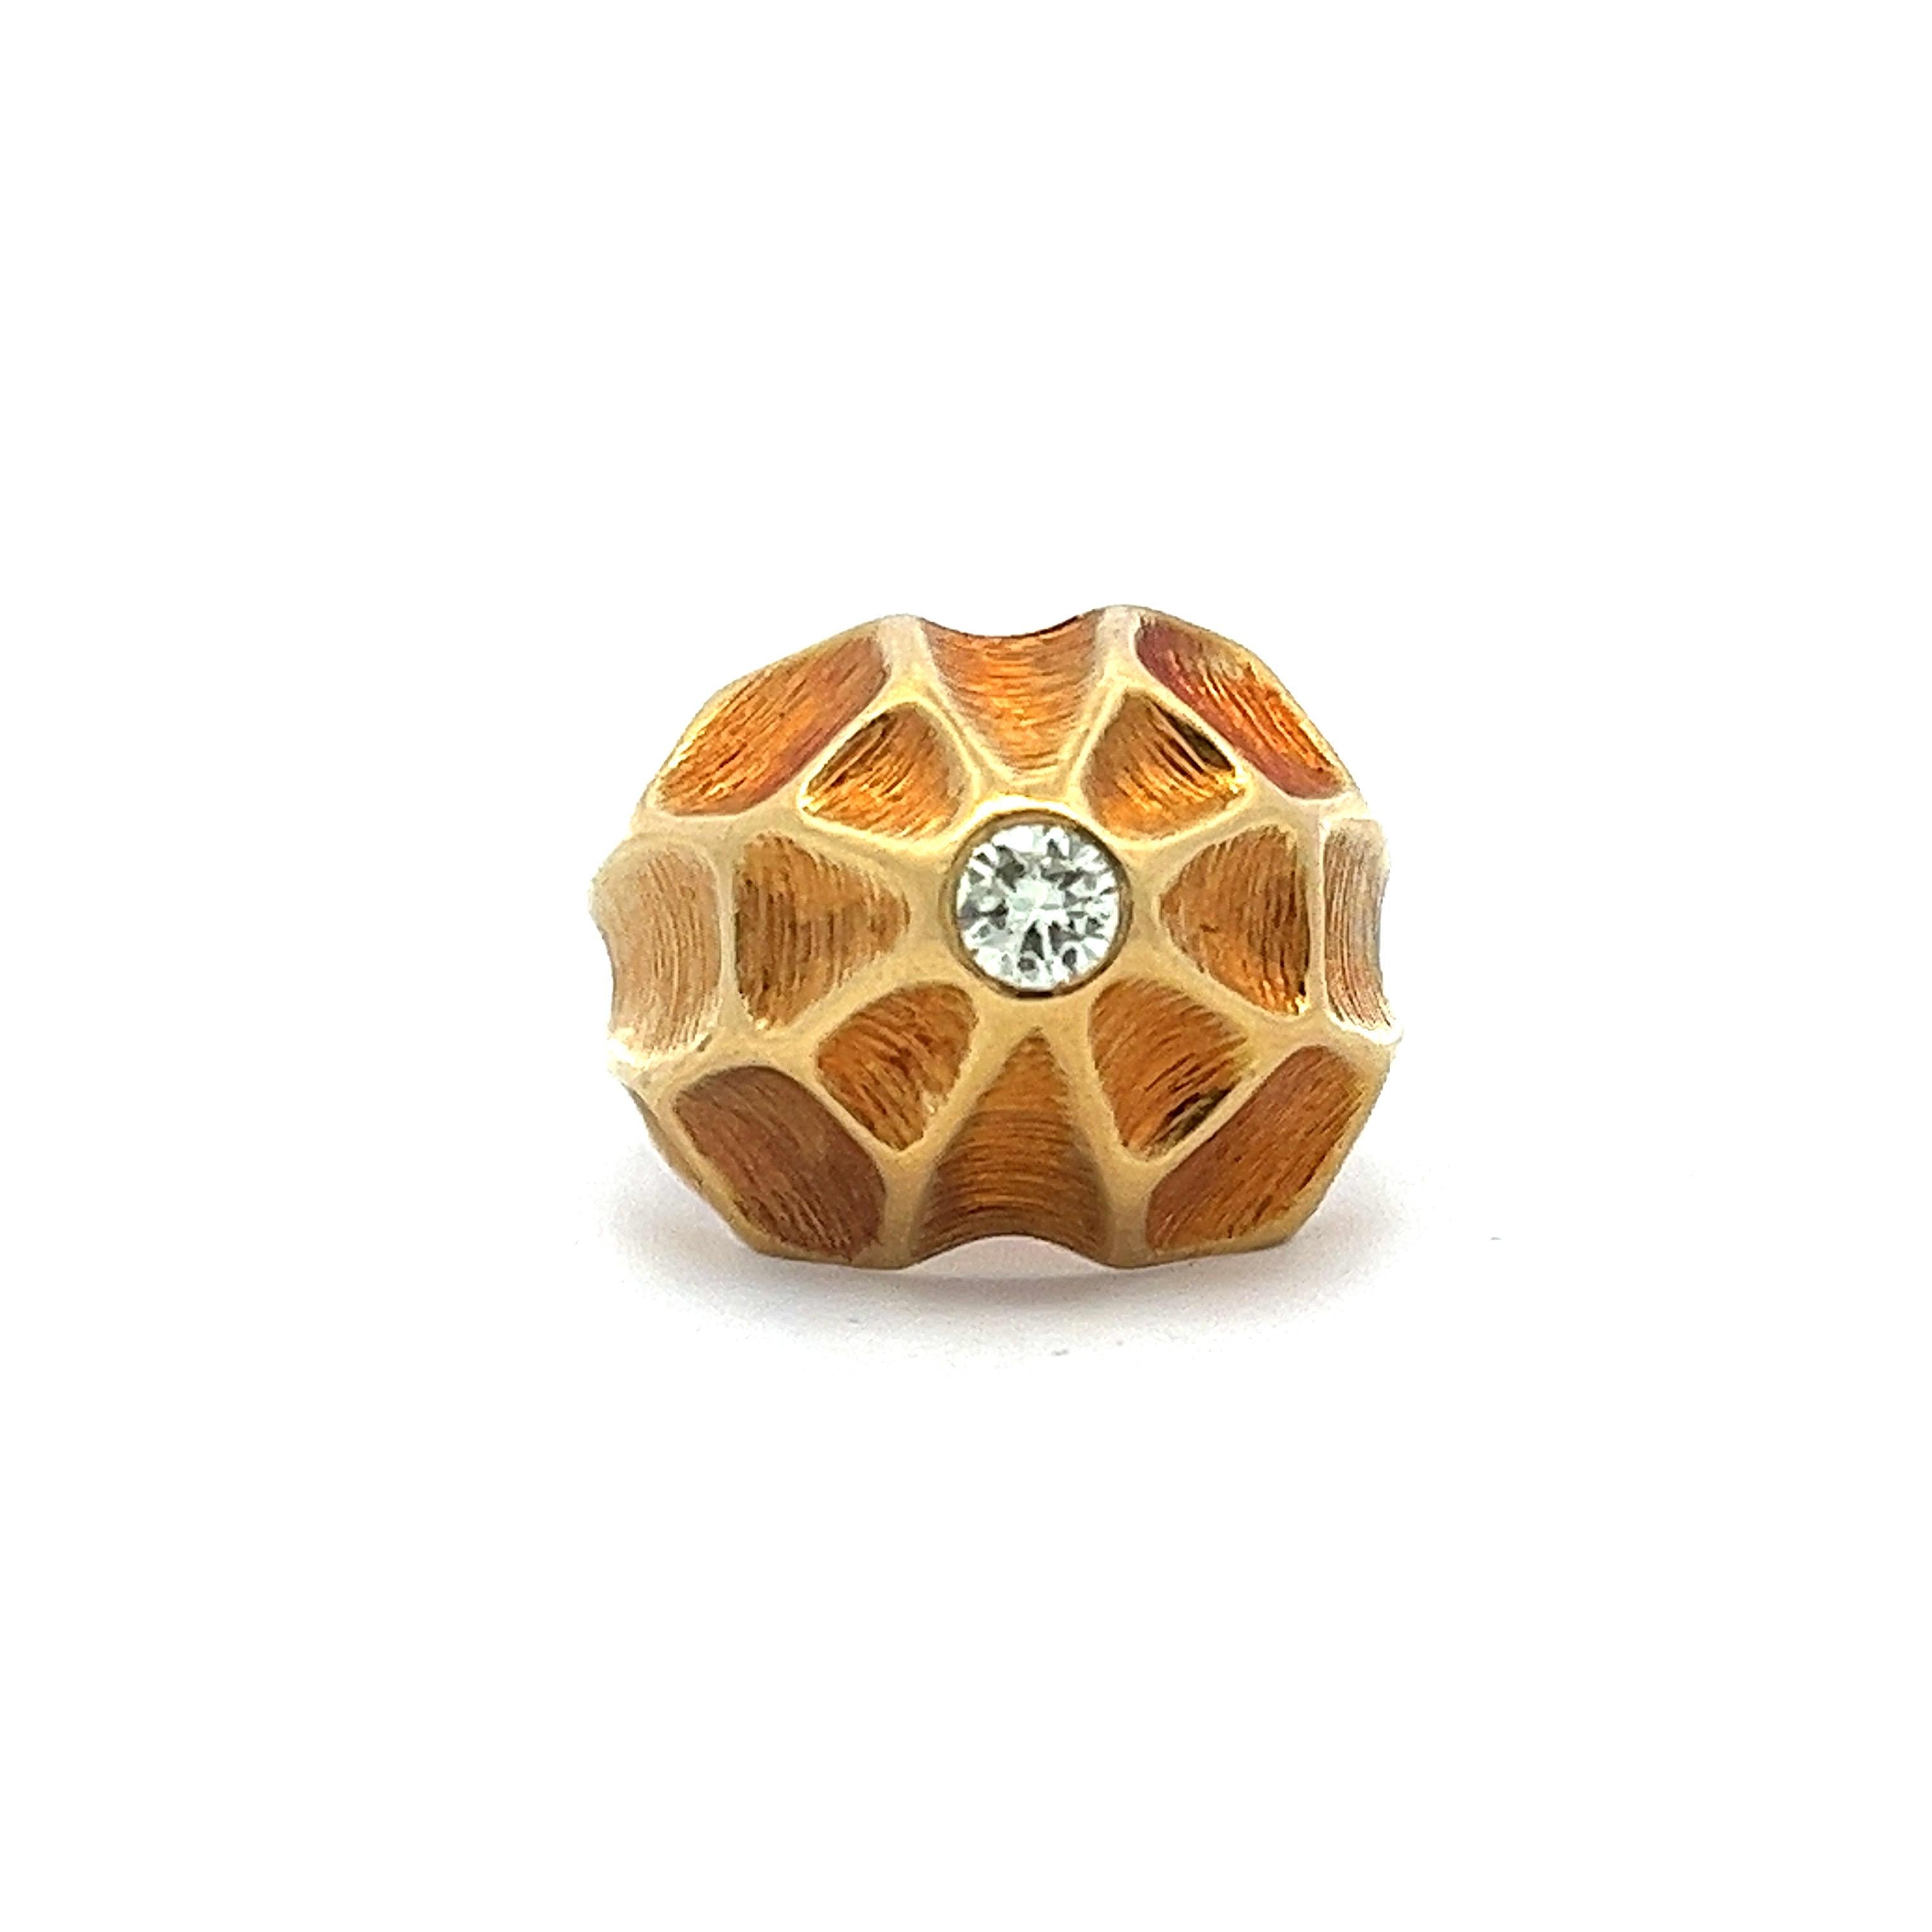 This modernist artisan ring, fashioned from 18-karat yellow gold, is designed to be suitable for both men and women. At the centerpiece, a single diamond weighing 0.17 carats is embedded at the apex of the dome. The ring's unique structure and